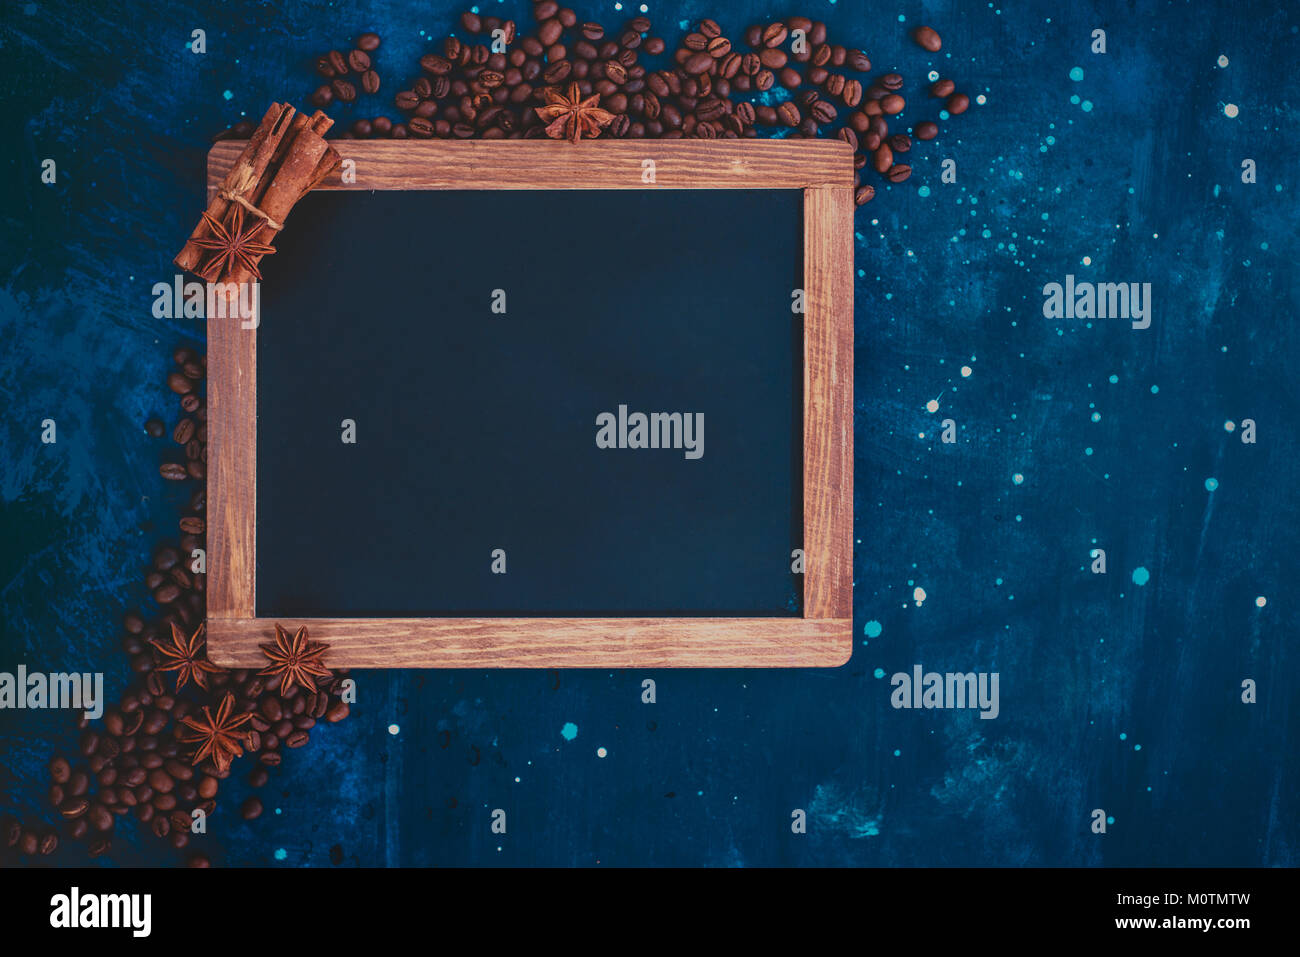 Blackboard frame with coffee beans, cinnamon and anise stars on a dark blue background. Header or title image with copy space. Top view dark food phot Stock Photo